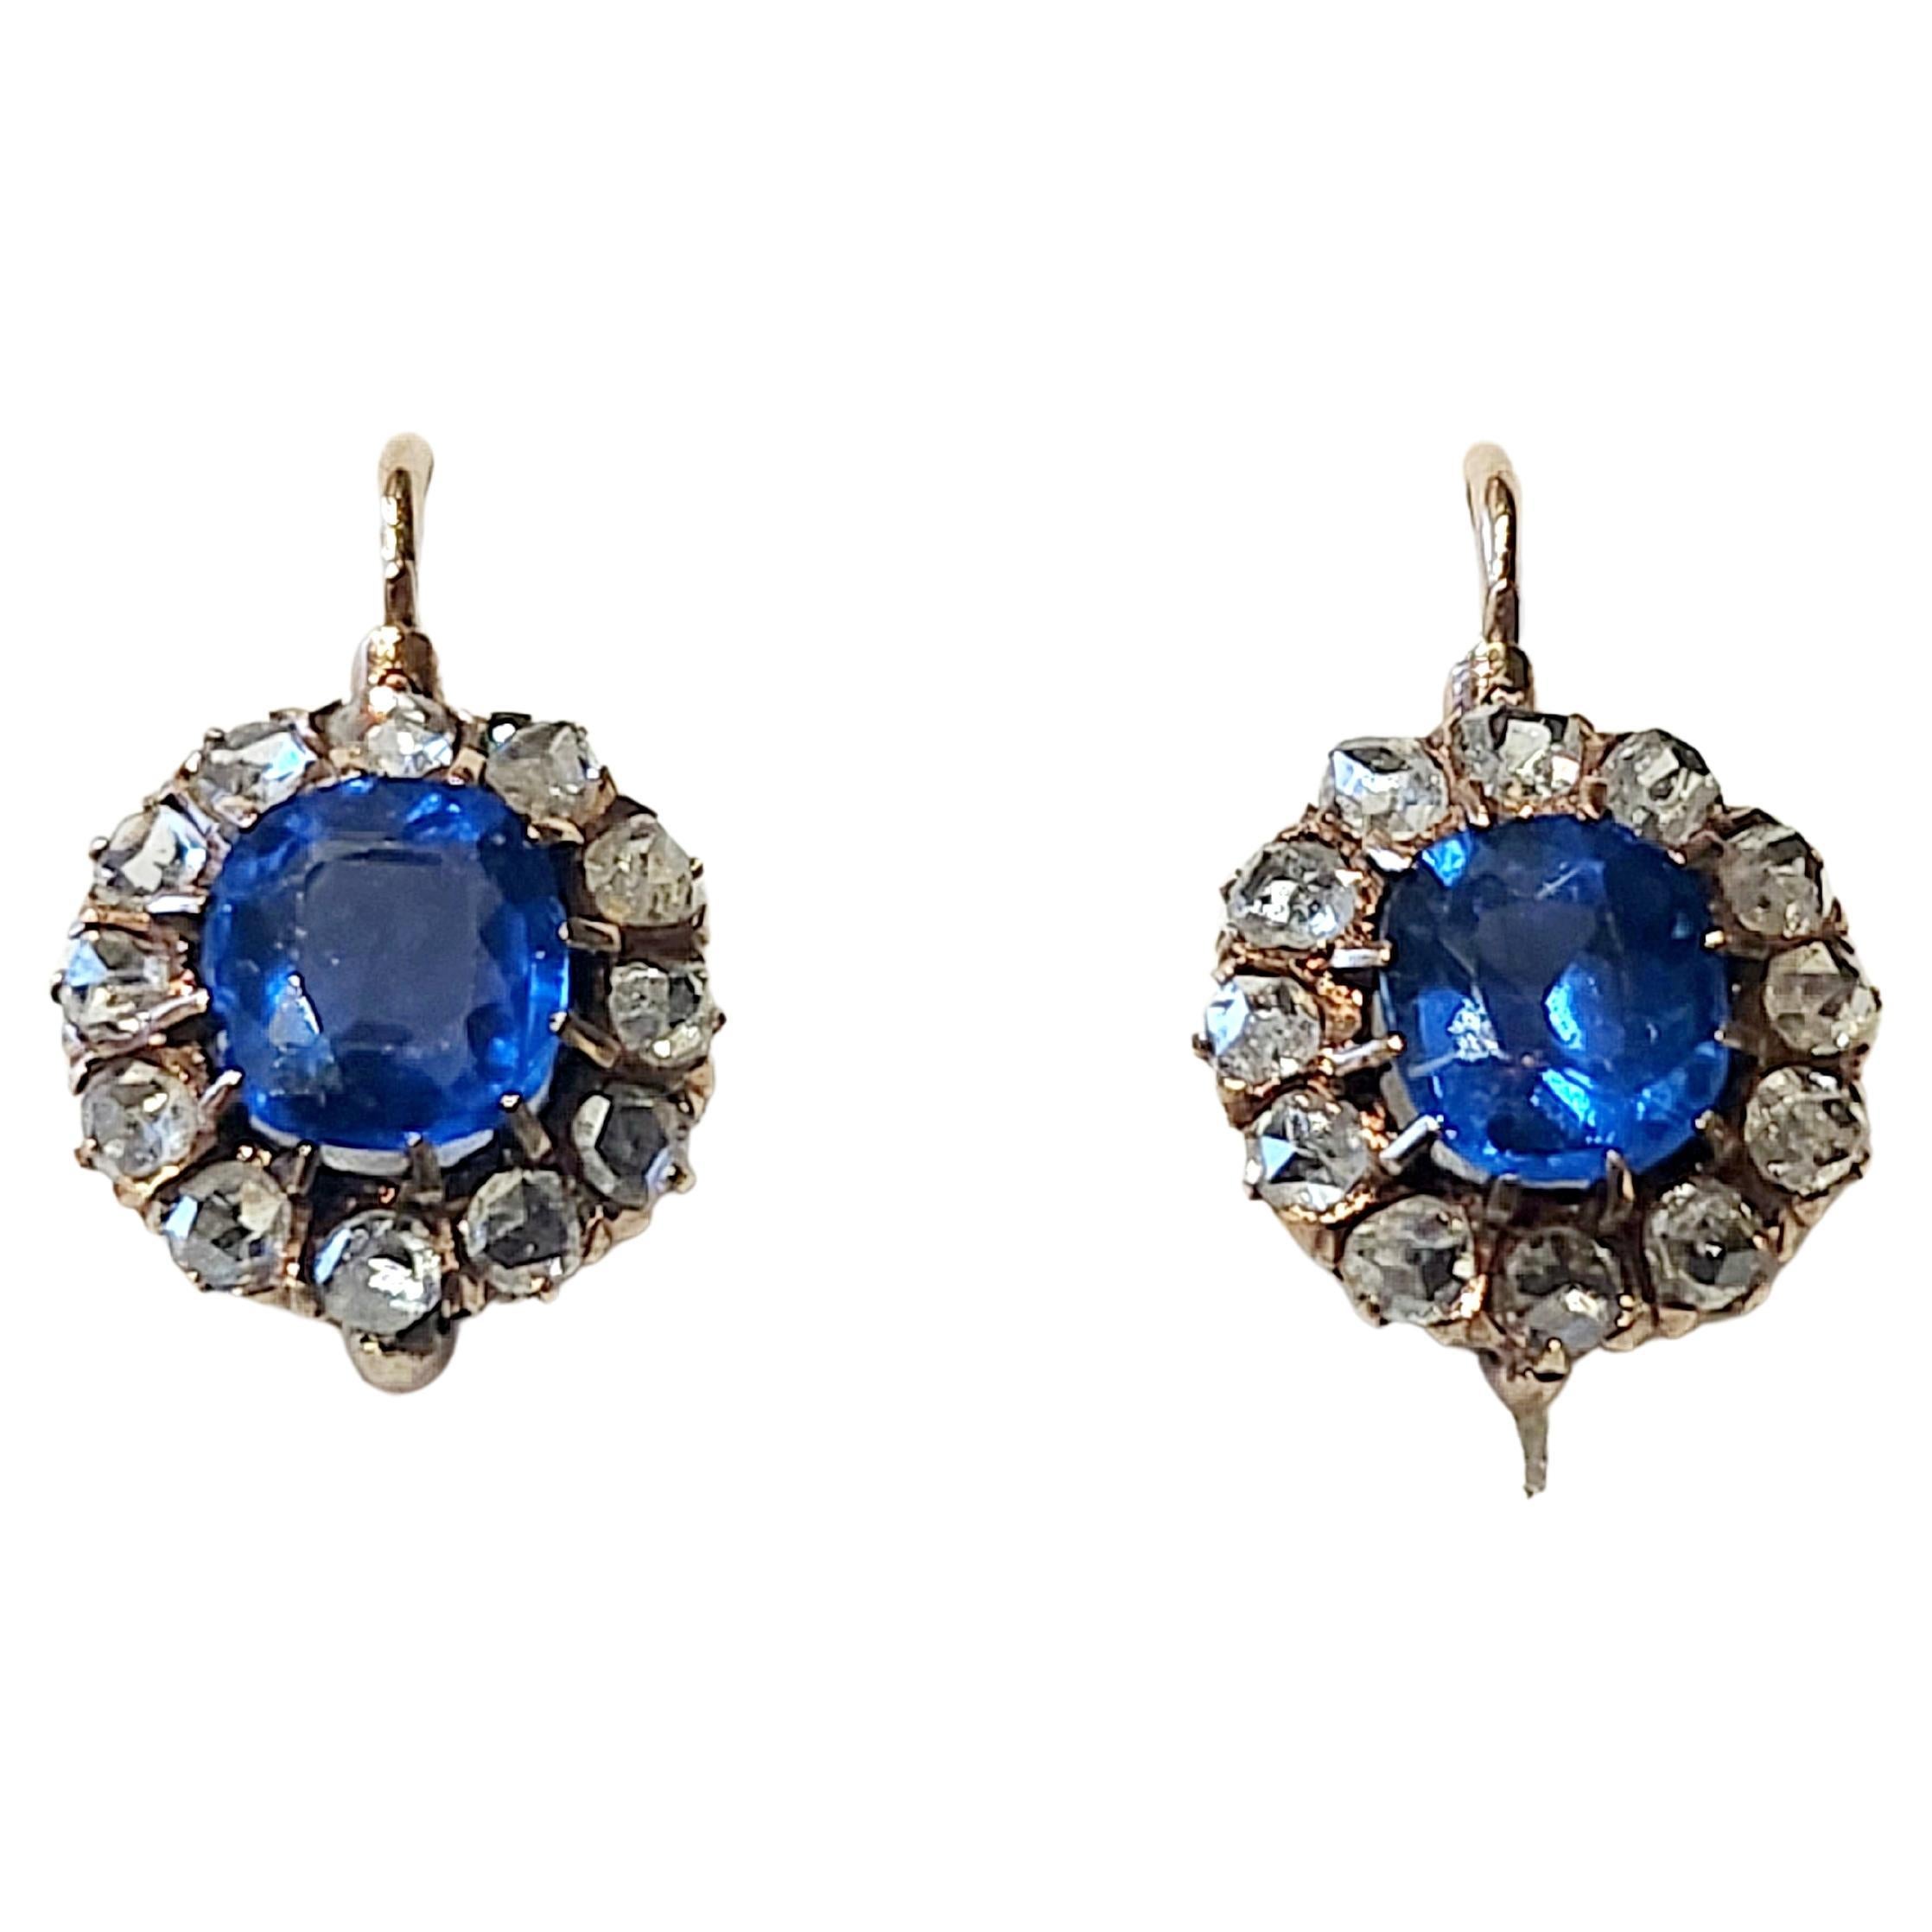 Antique 1880.c earrings centered with natural blue burmese sapphire excellent royal blue color flanked with rose cut diamonds in solitare style gold earrings head diameter 5mm estimate sapphire weight 2 carats earrings lenght 1.80cm dates back to